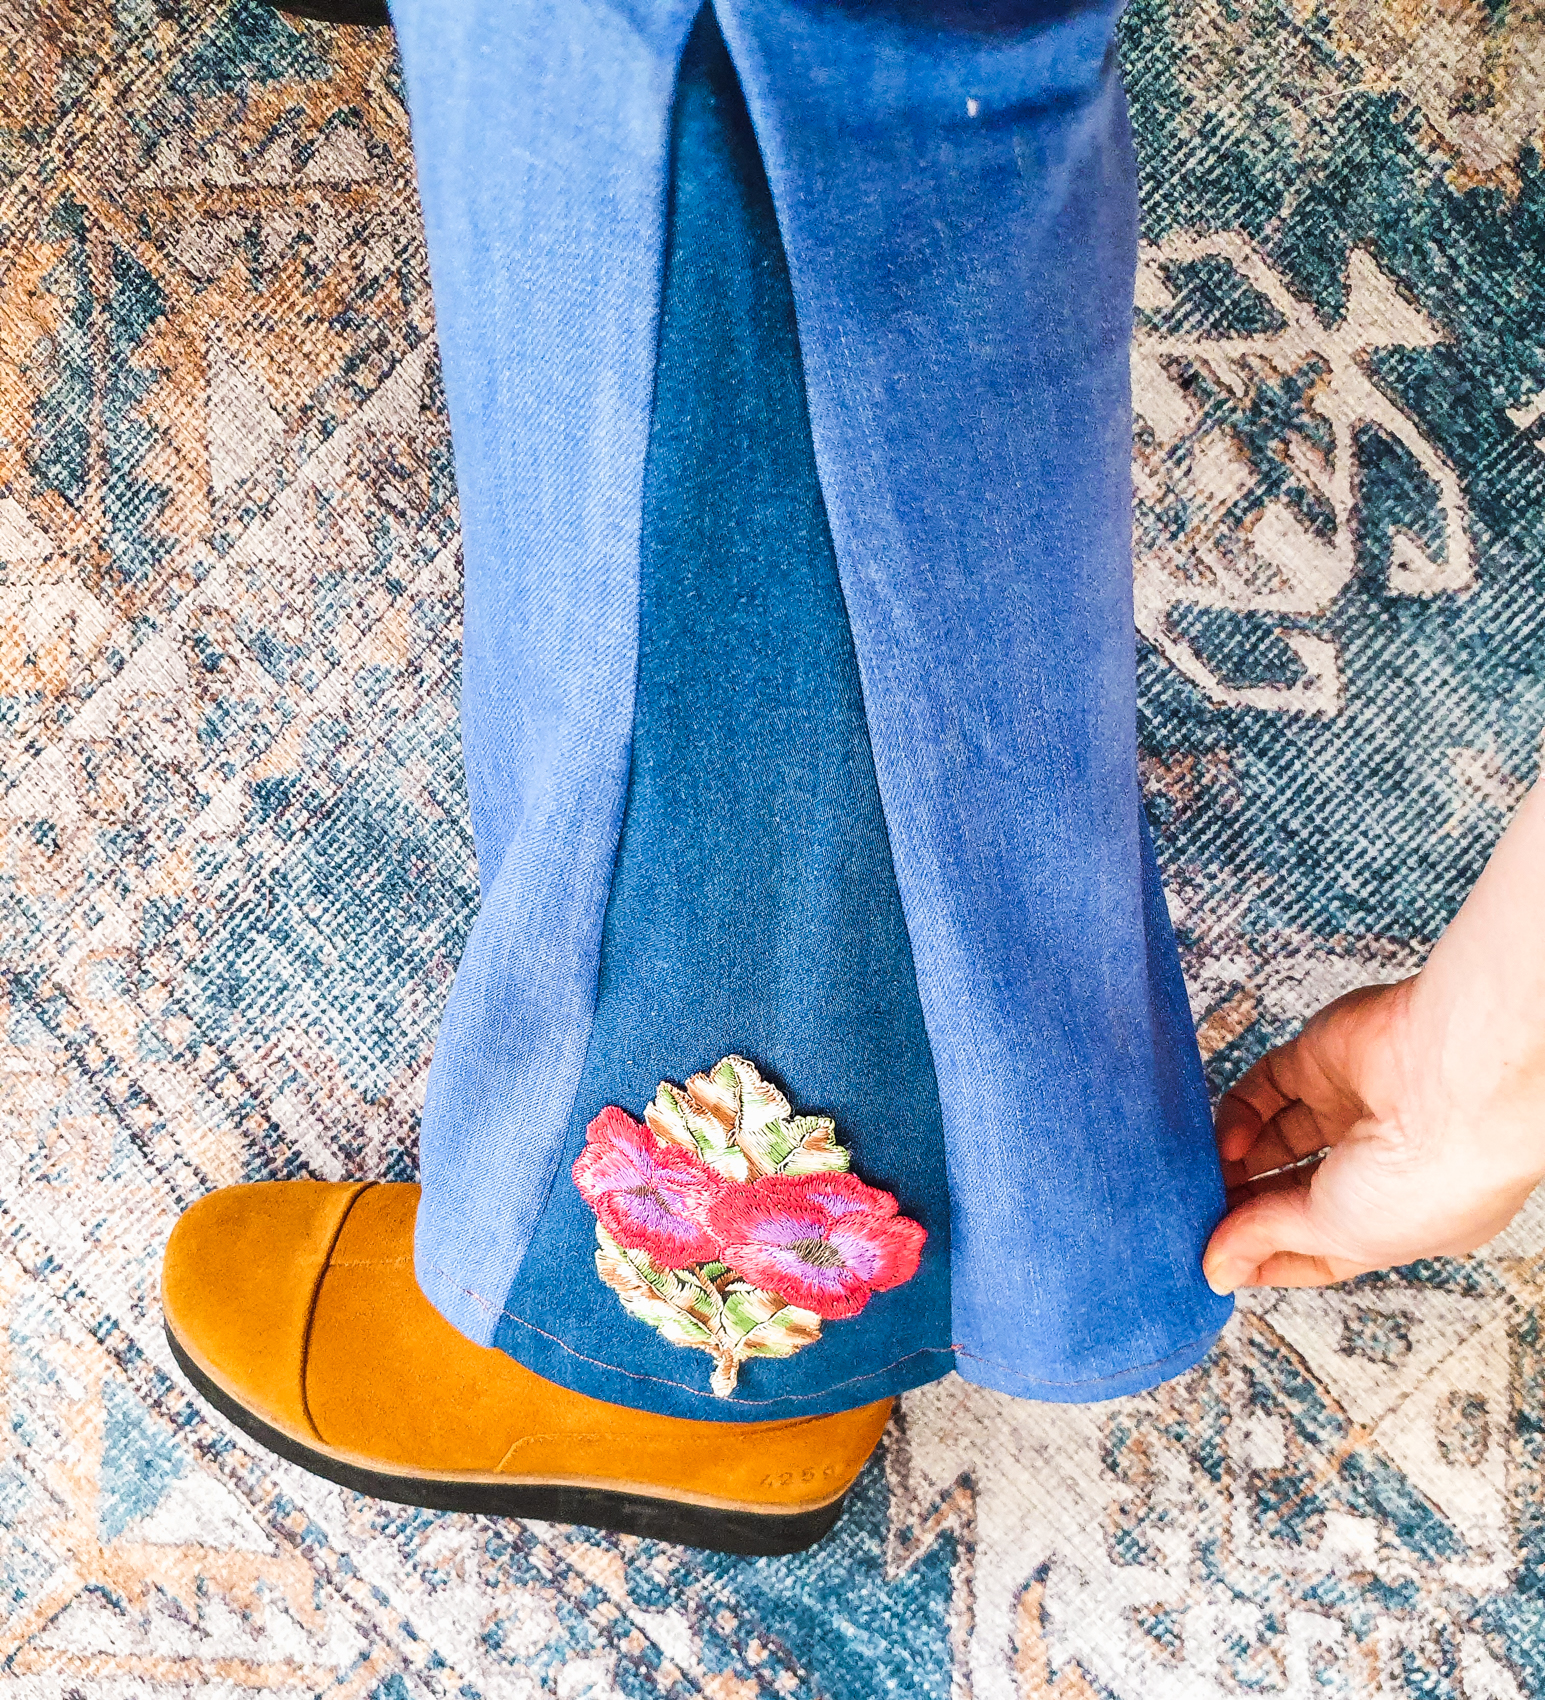 DIY sewing flared jeans: turn your own pair into bell bottoms